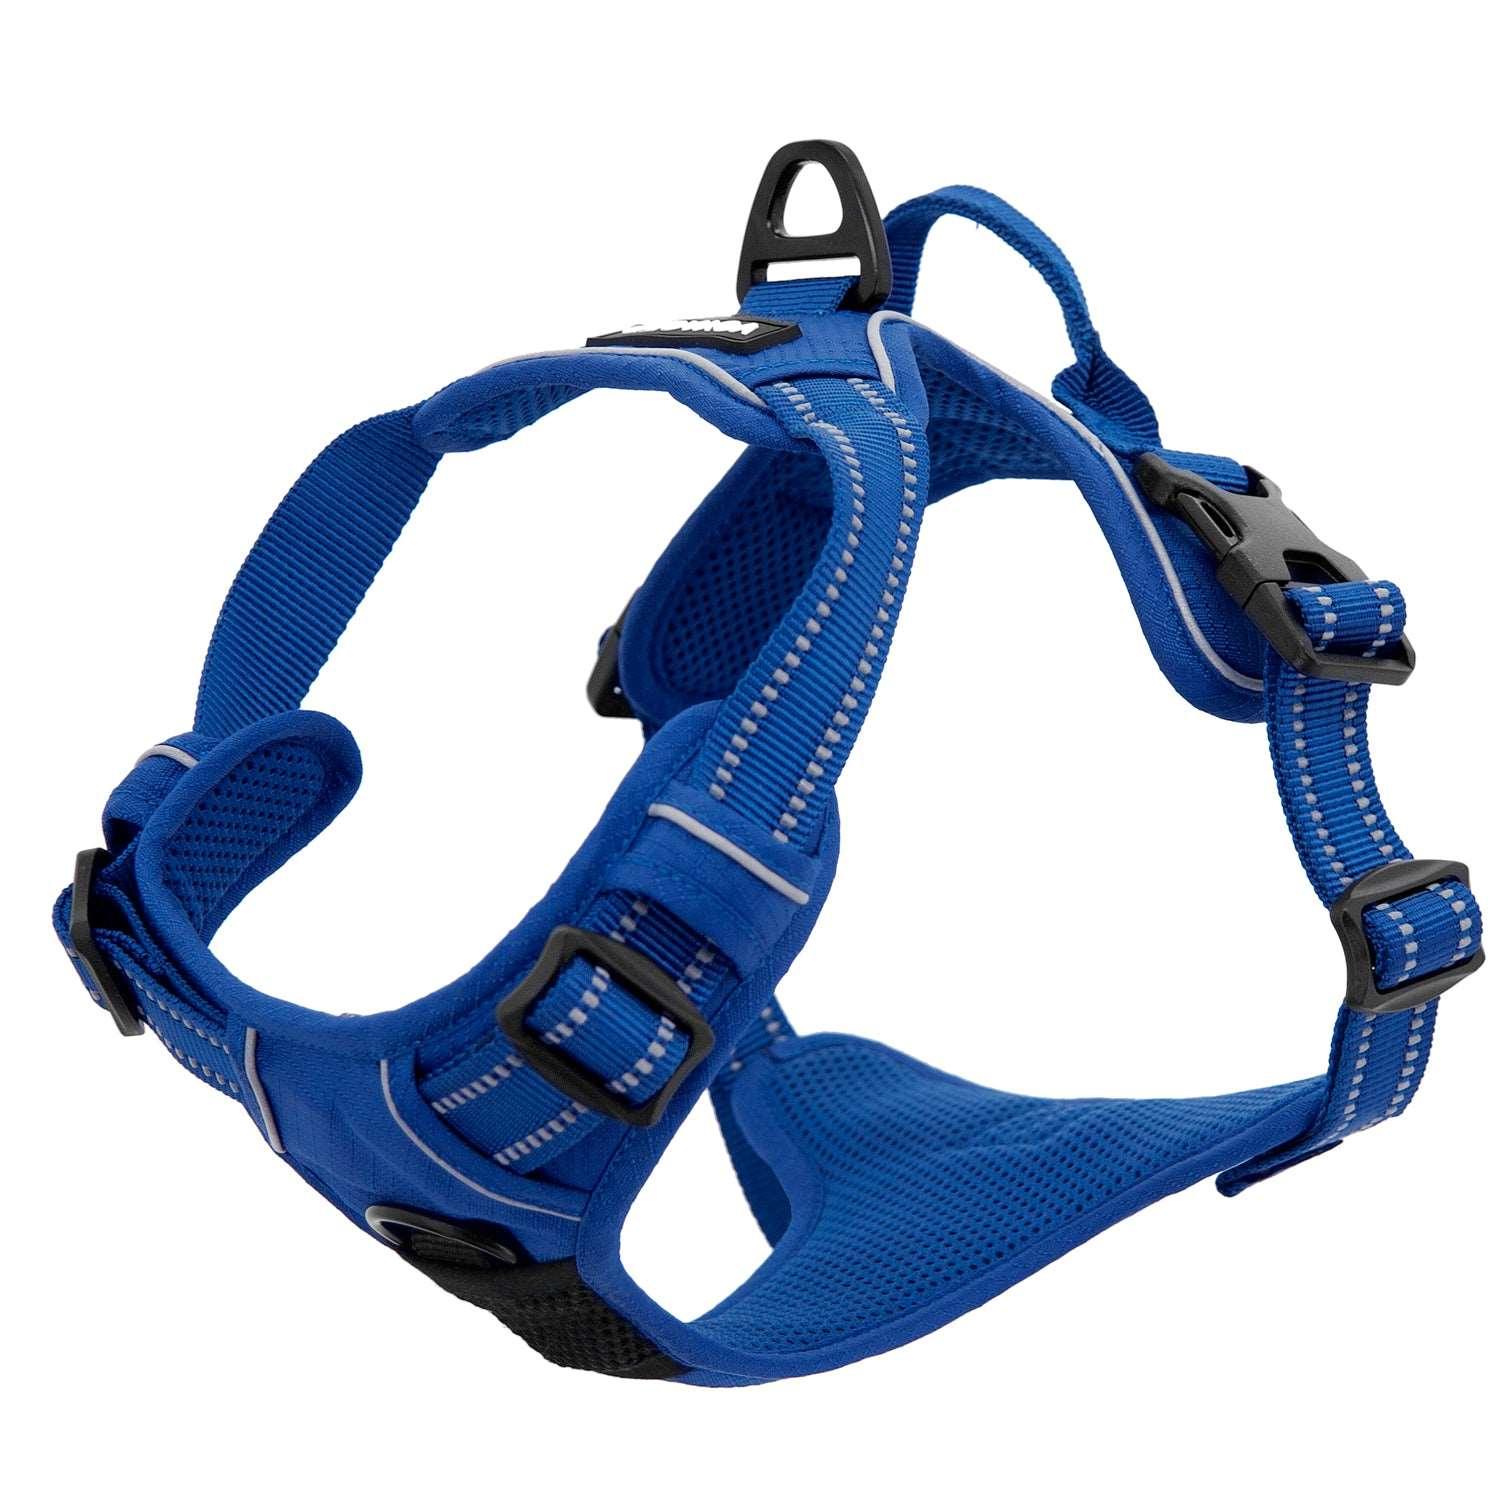 VOYAGER Dual-Attachment Dog Harness in Royal Blue - Expanded